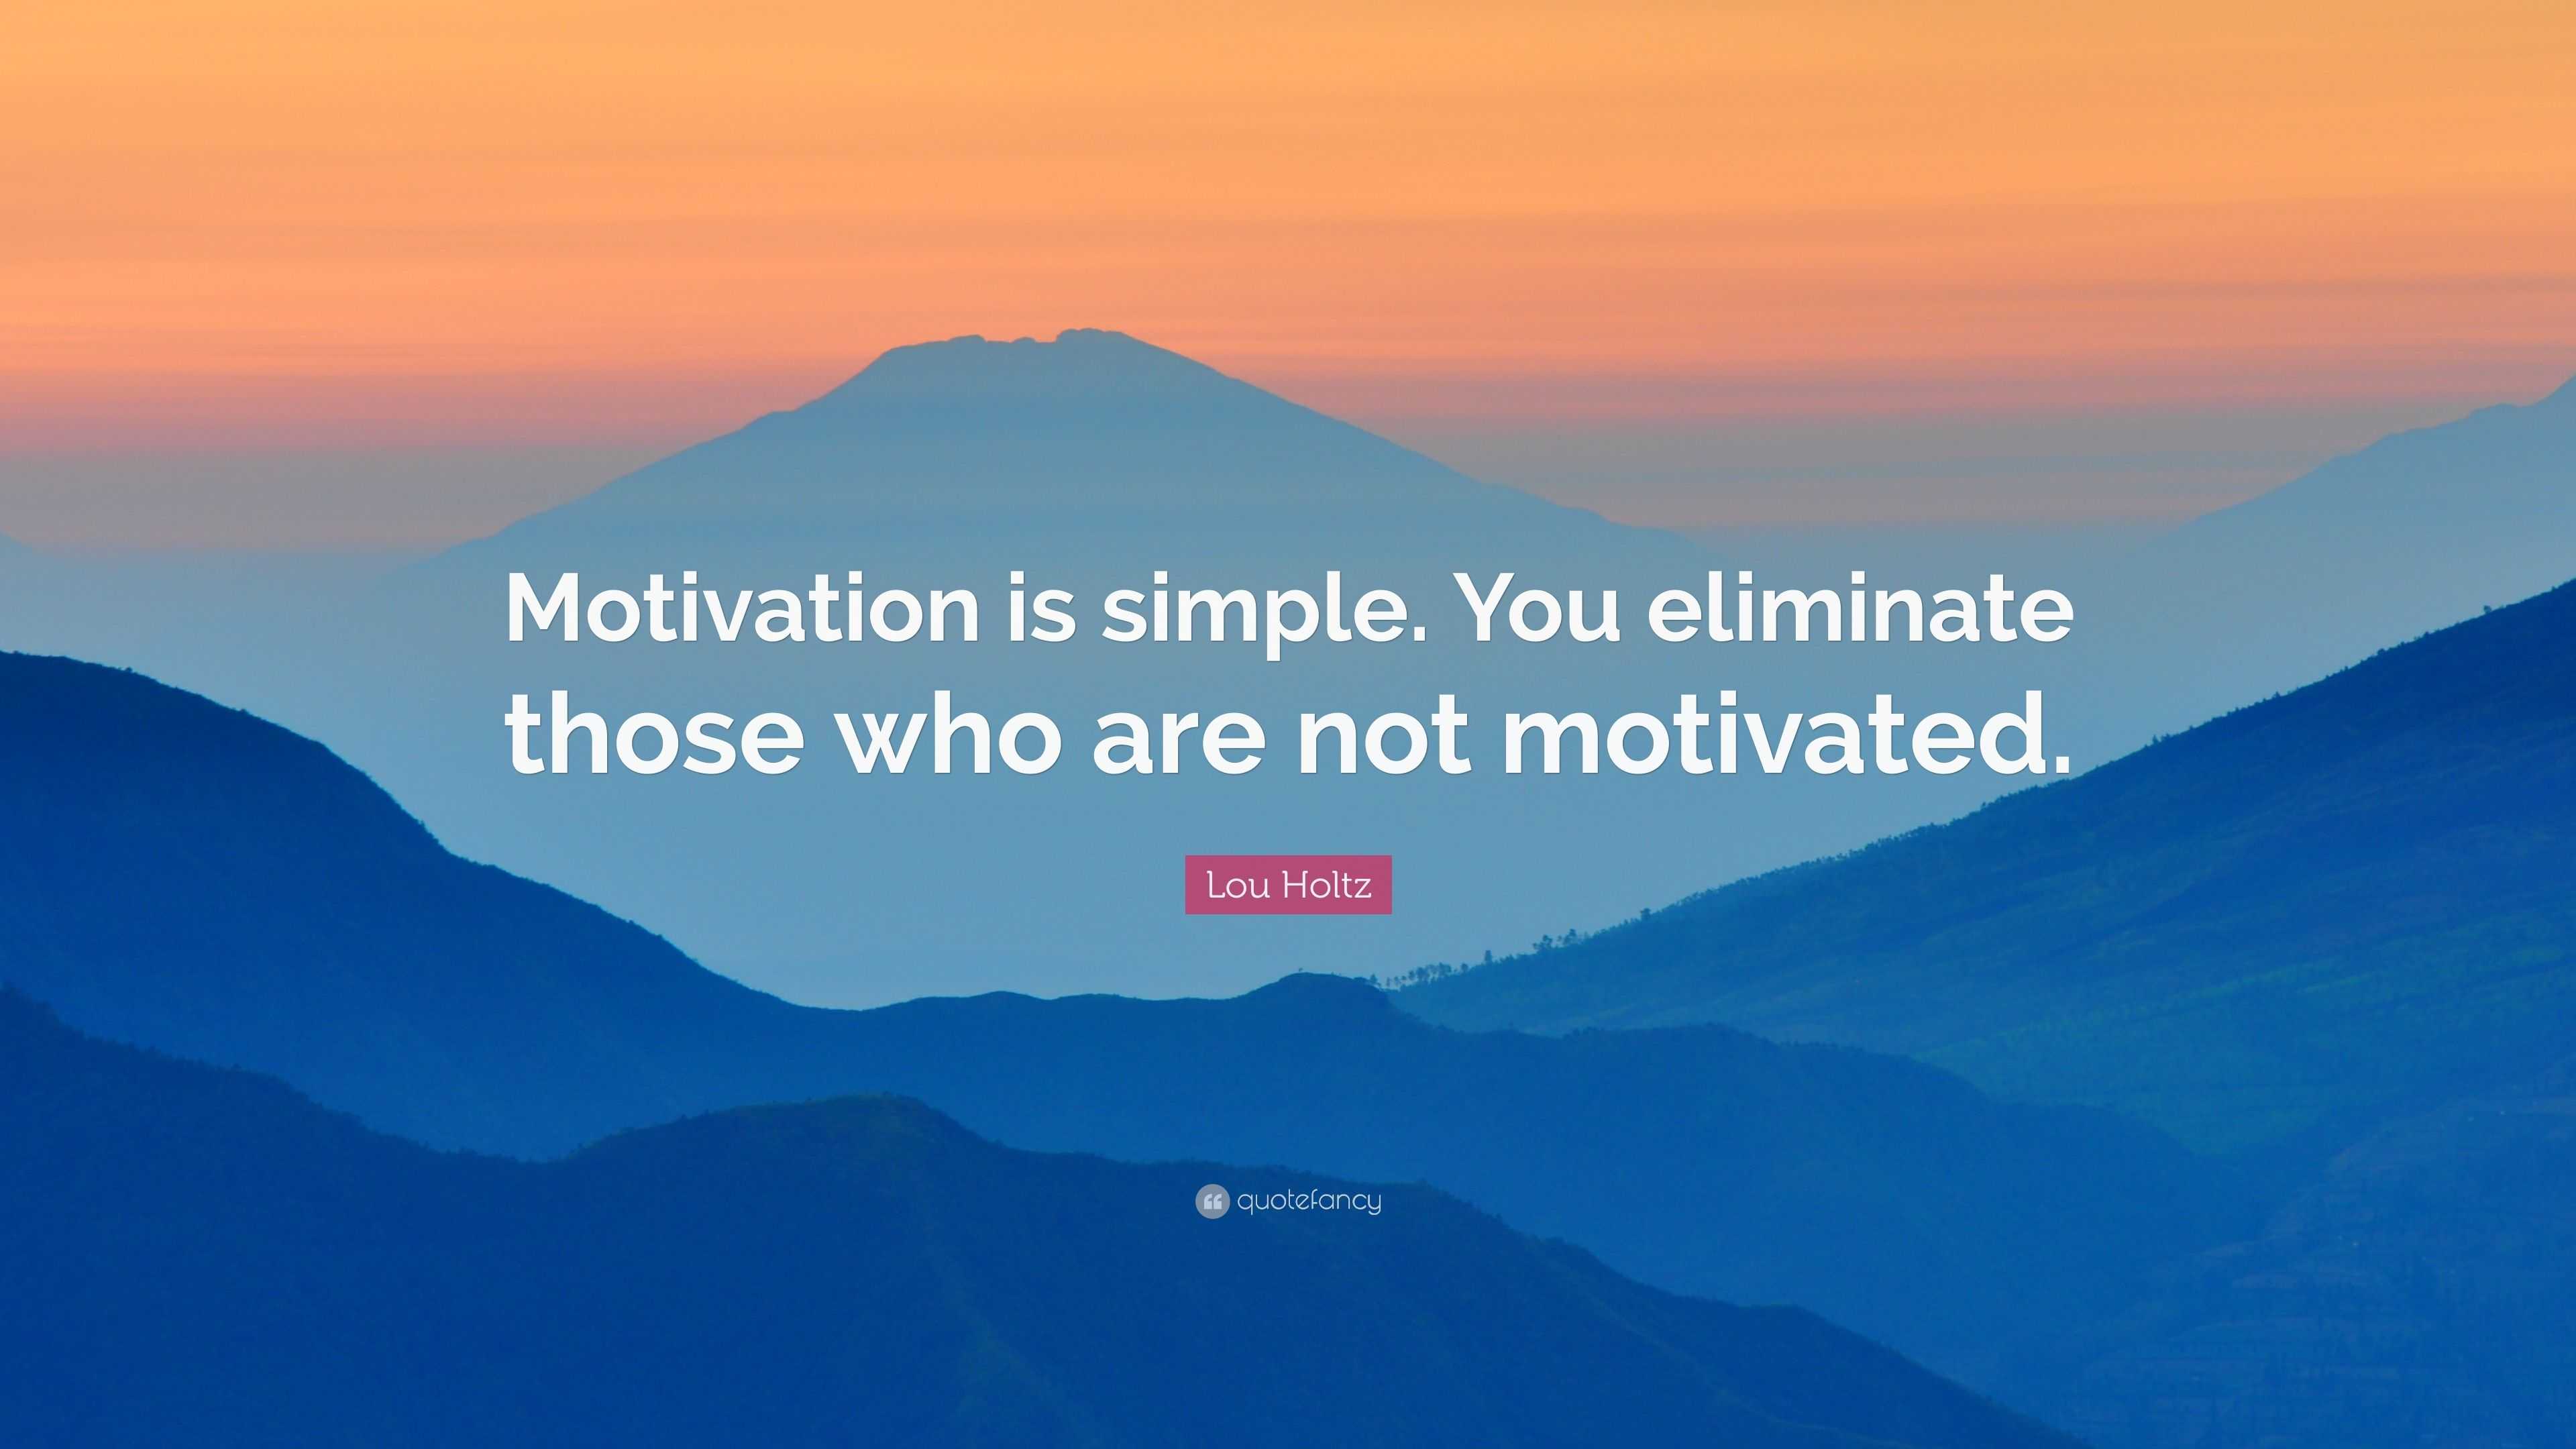 Lou Holtz Quote: “Motivation is simple. You eliminate those who are not